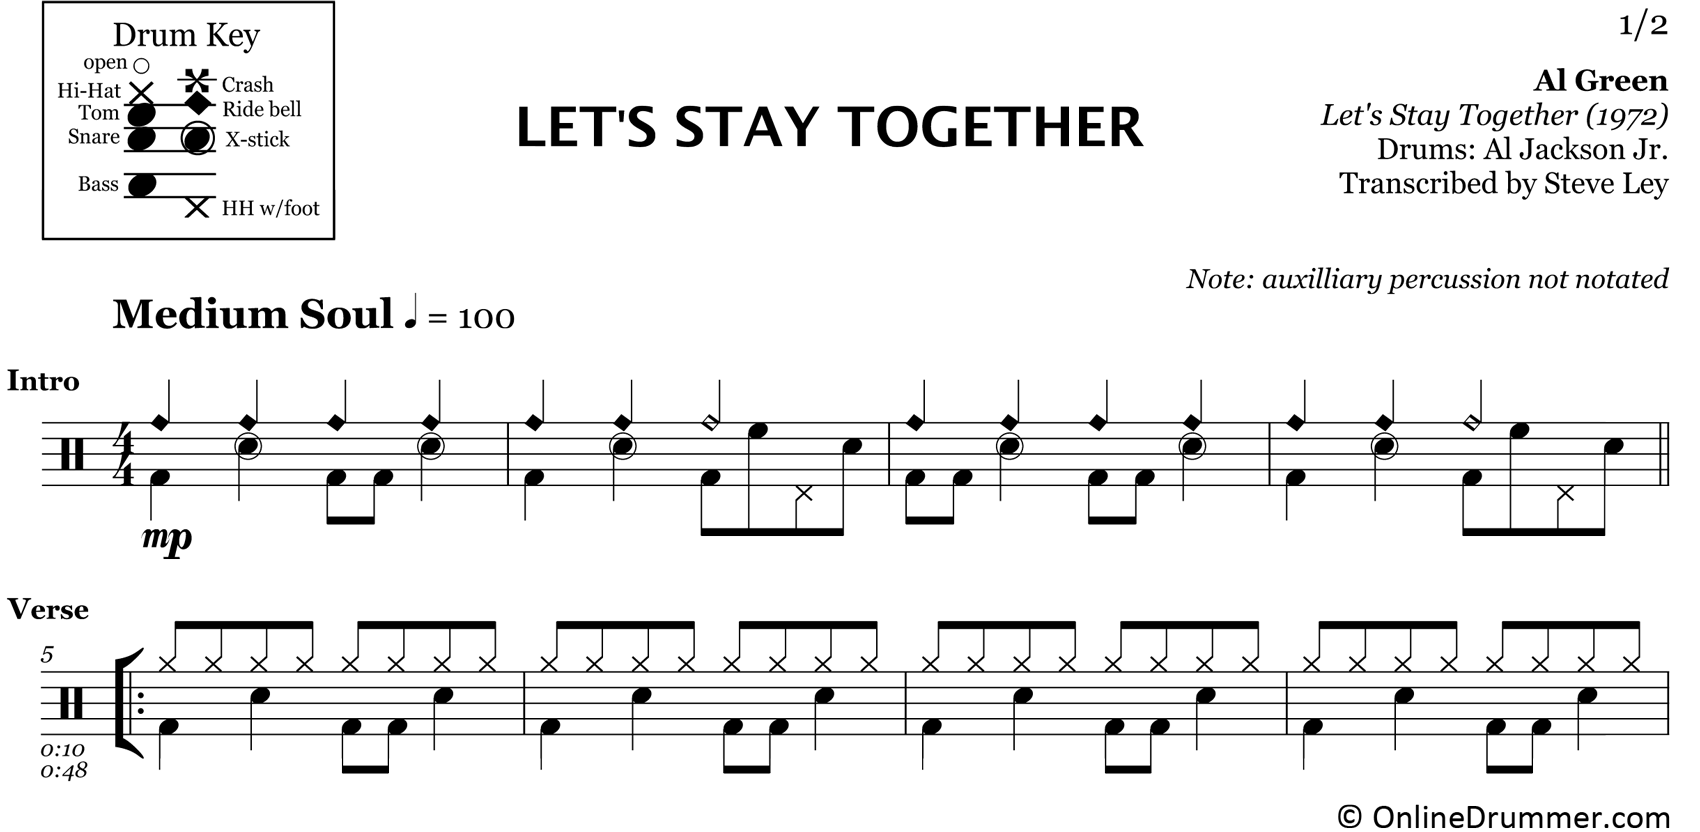 Let's Stay Together - Al Green - Drum Sheet Music